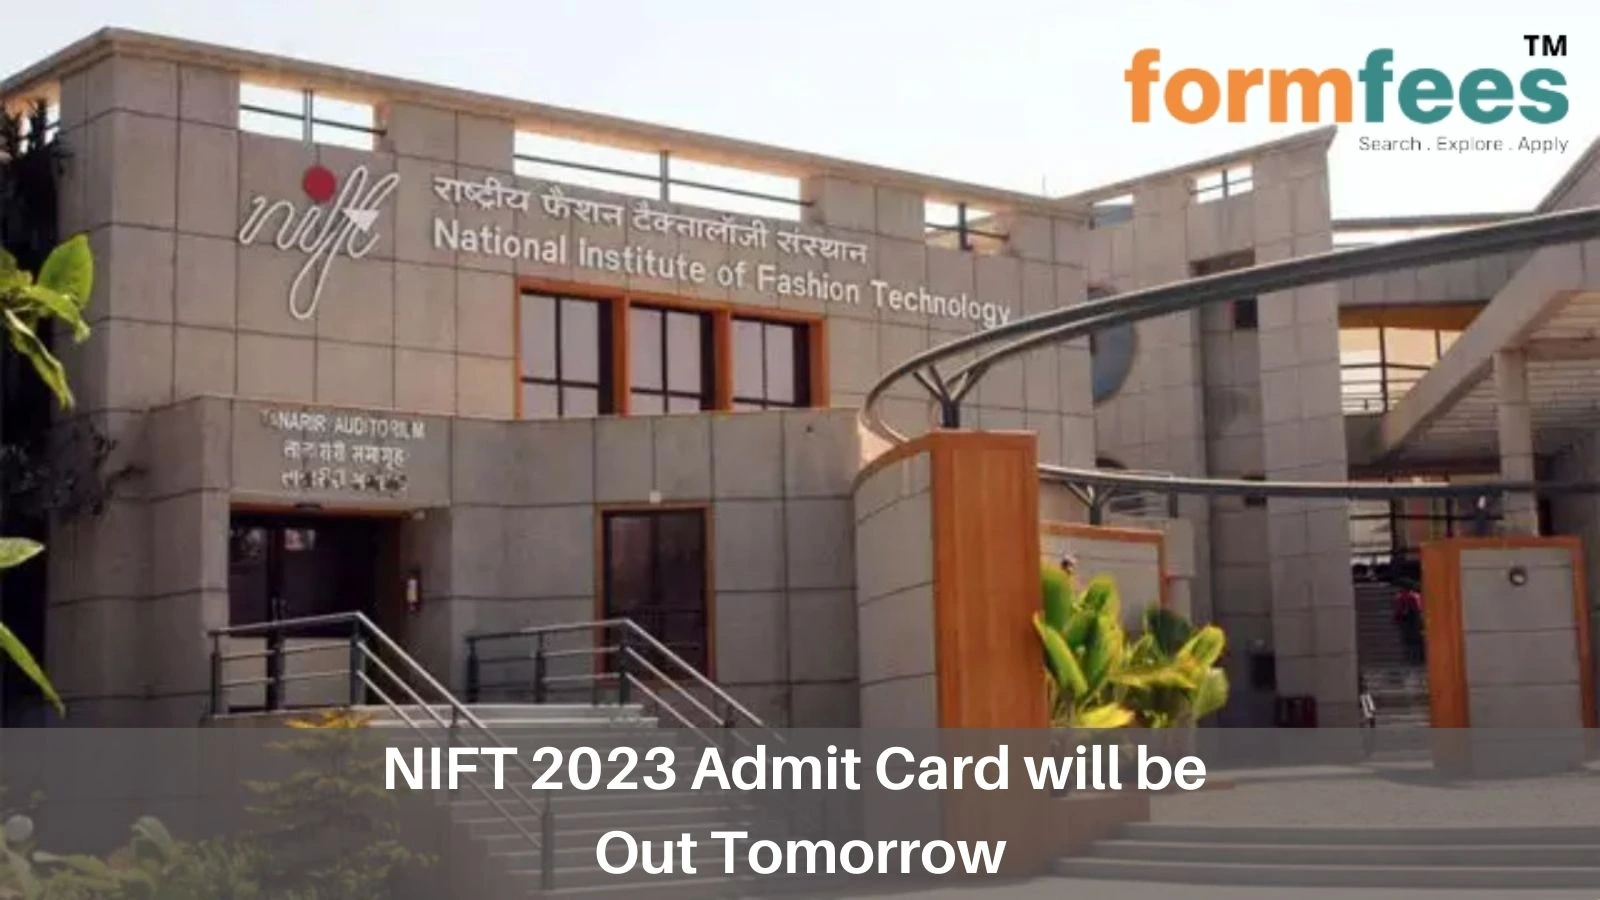 NIFT 2023 Admit Card will be Out Tomorrow